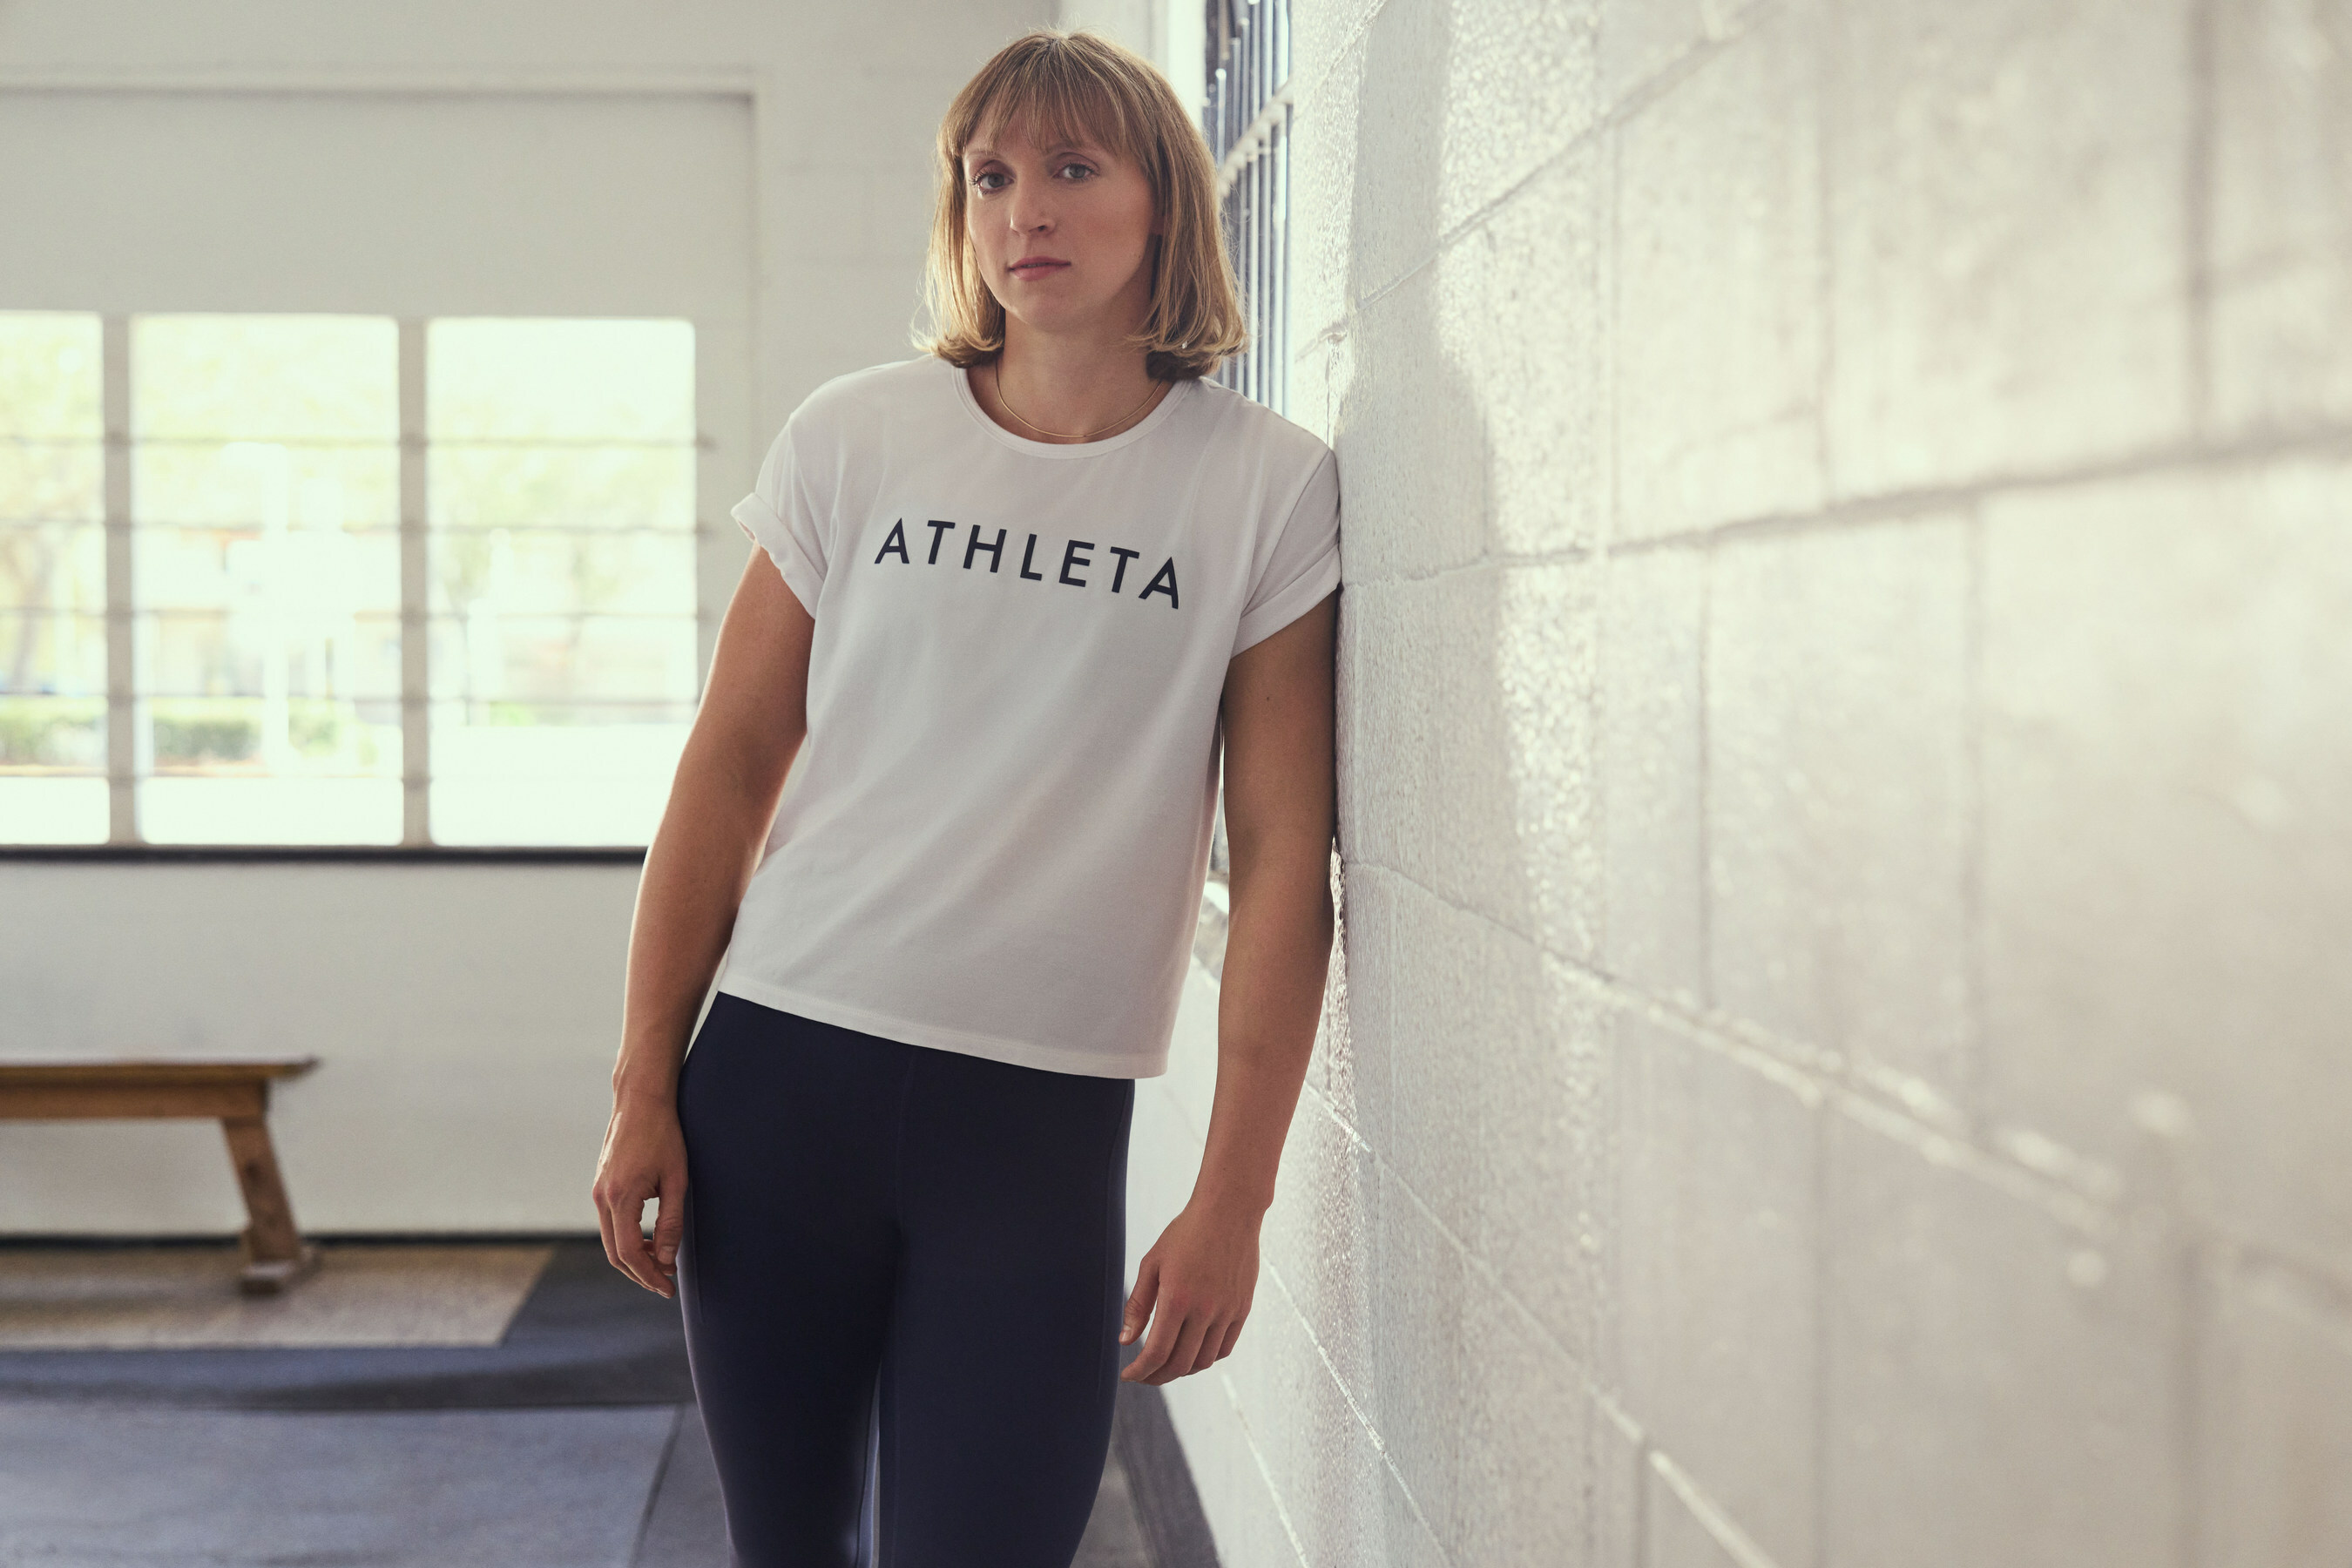 Beyond Sport on X: The most decorated woman swimmer of all time,  @katieledecky, has become the newest member of @Athleta's #PowerofShe  collective. 🏊🏾 Ledecky will also feature in their new brand campaign